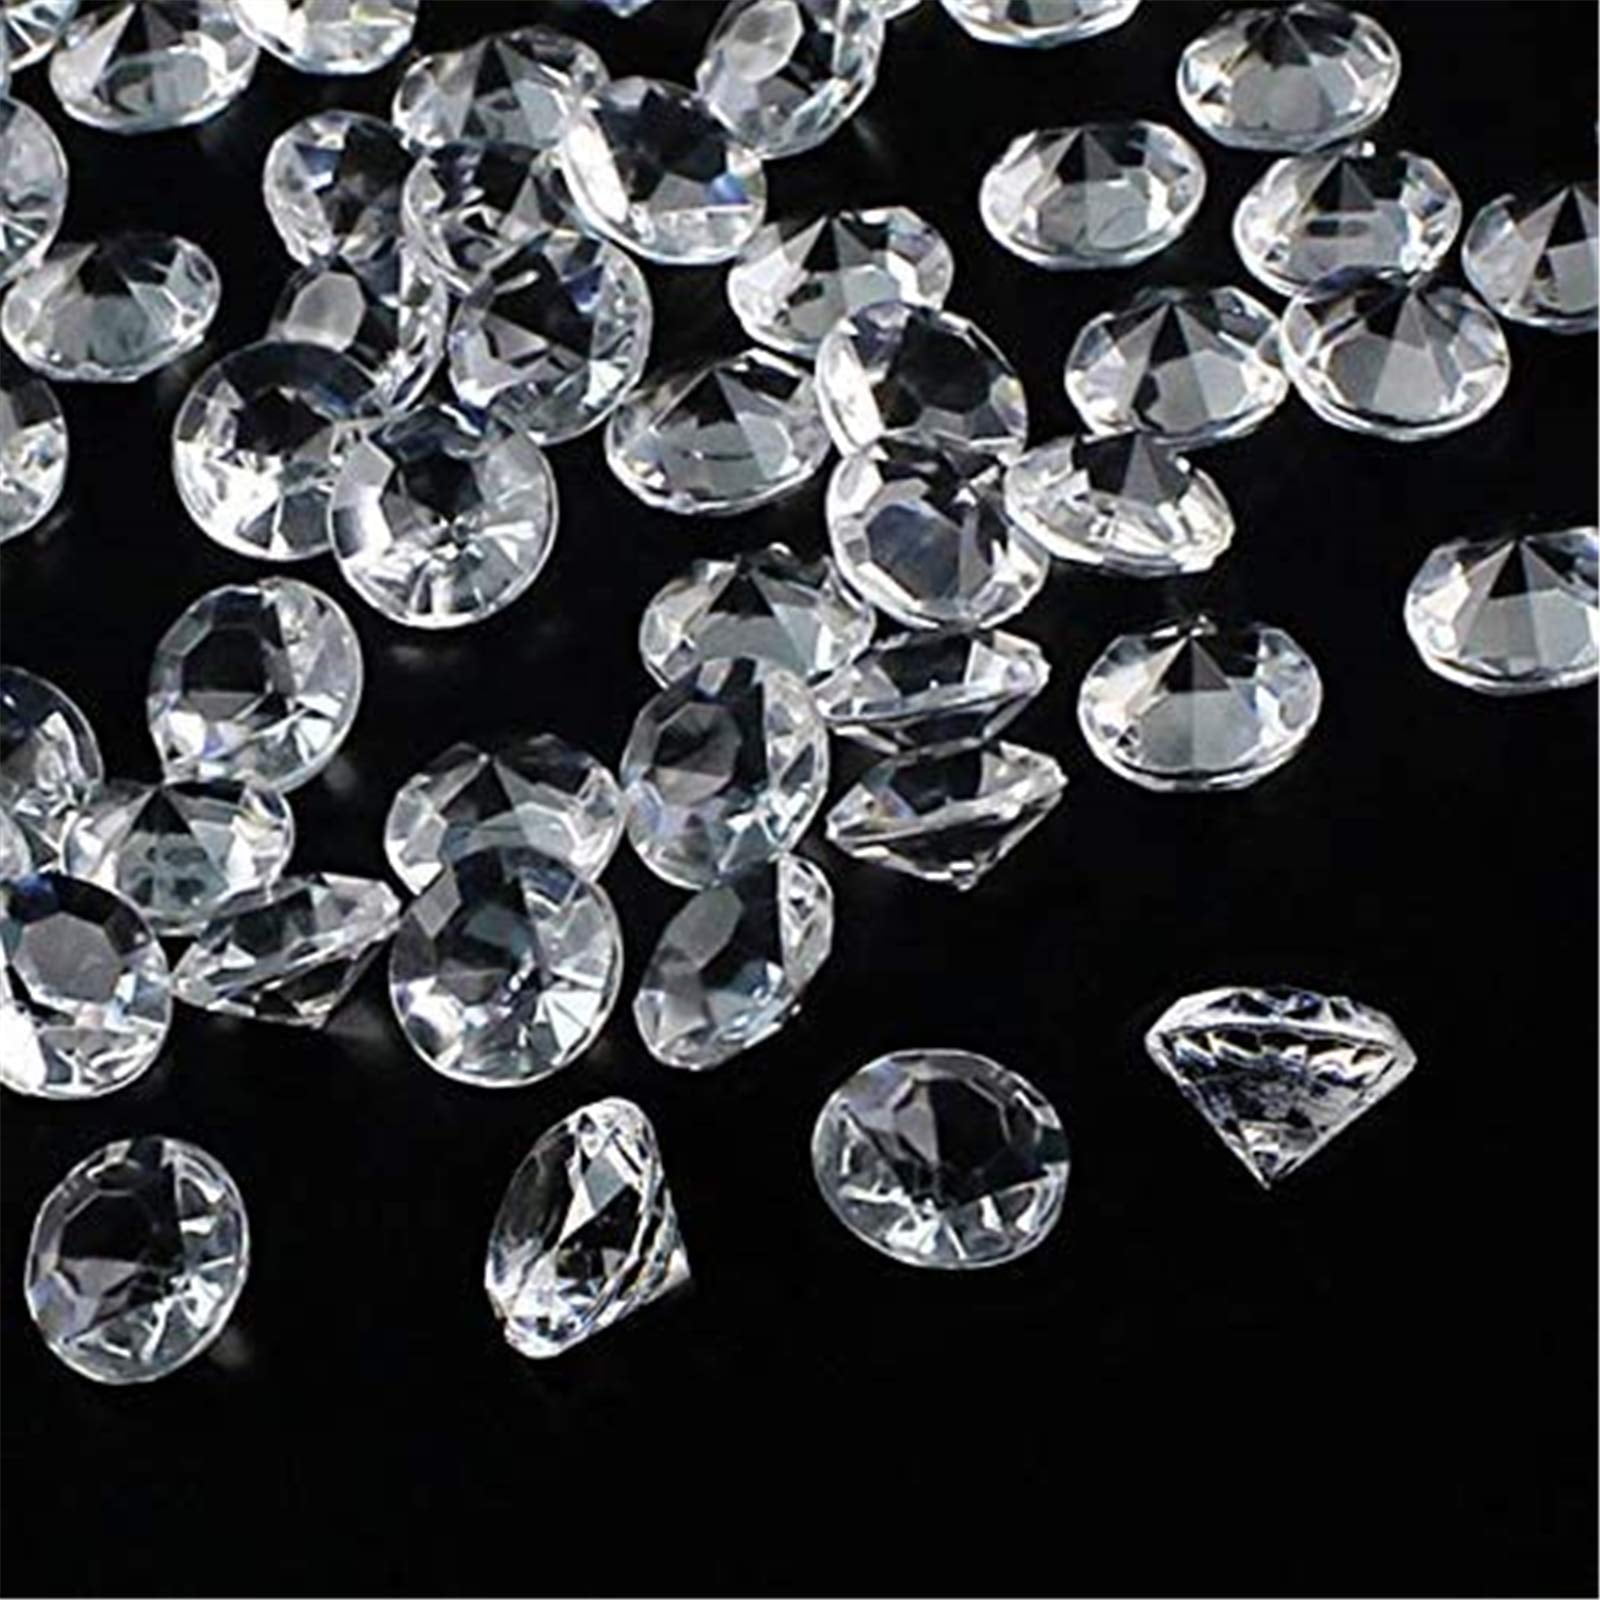 Diamond Confetti Wedding Party Table Scatter Decoration Jewels Gems Ice Acrylic 